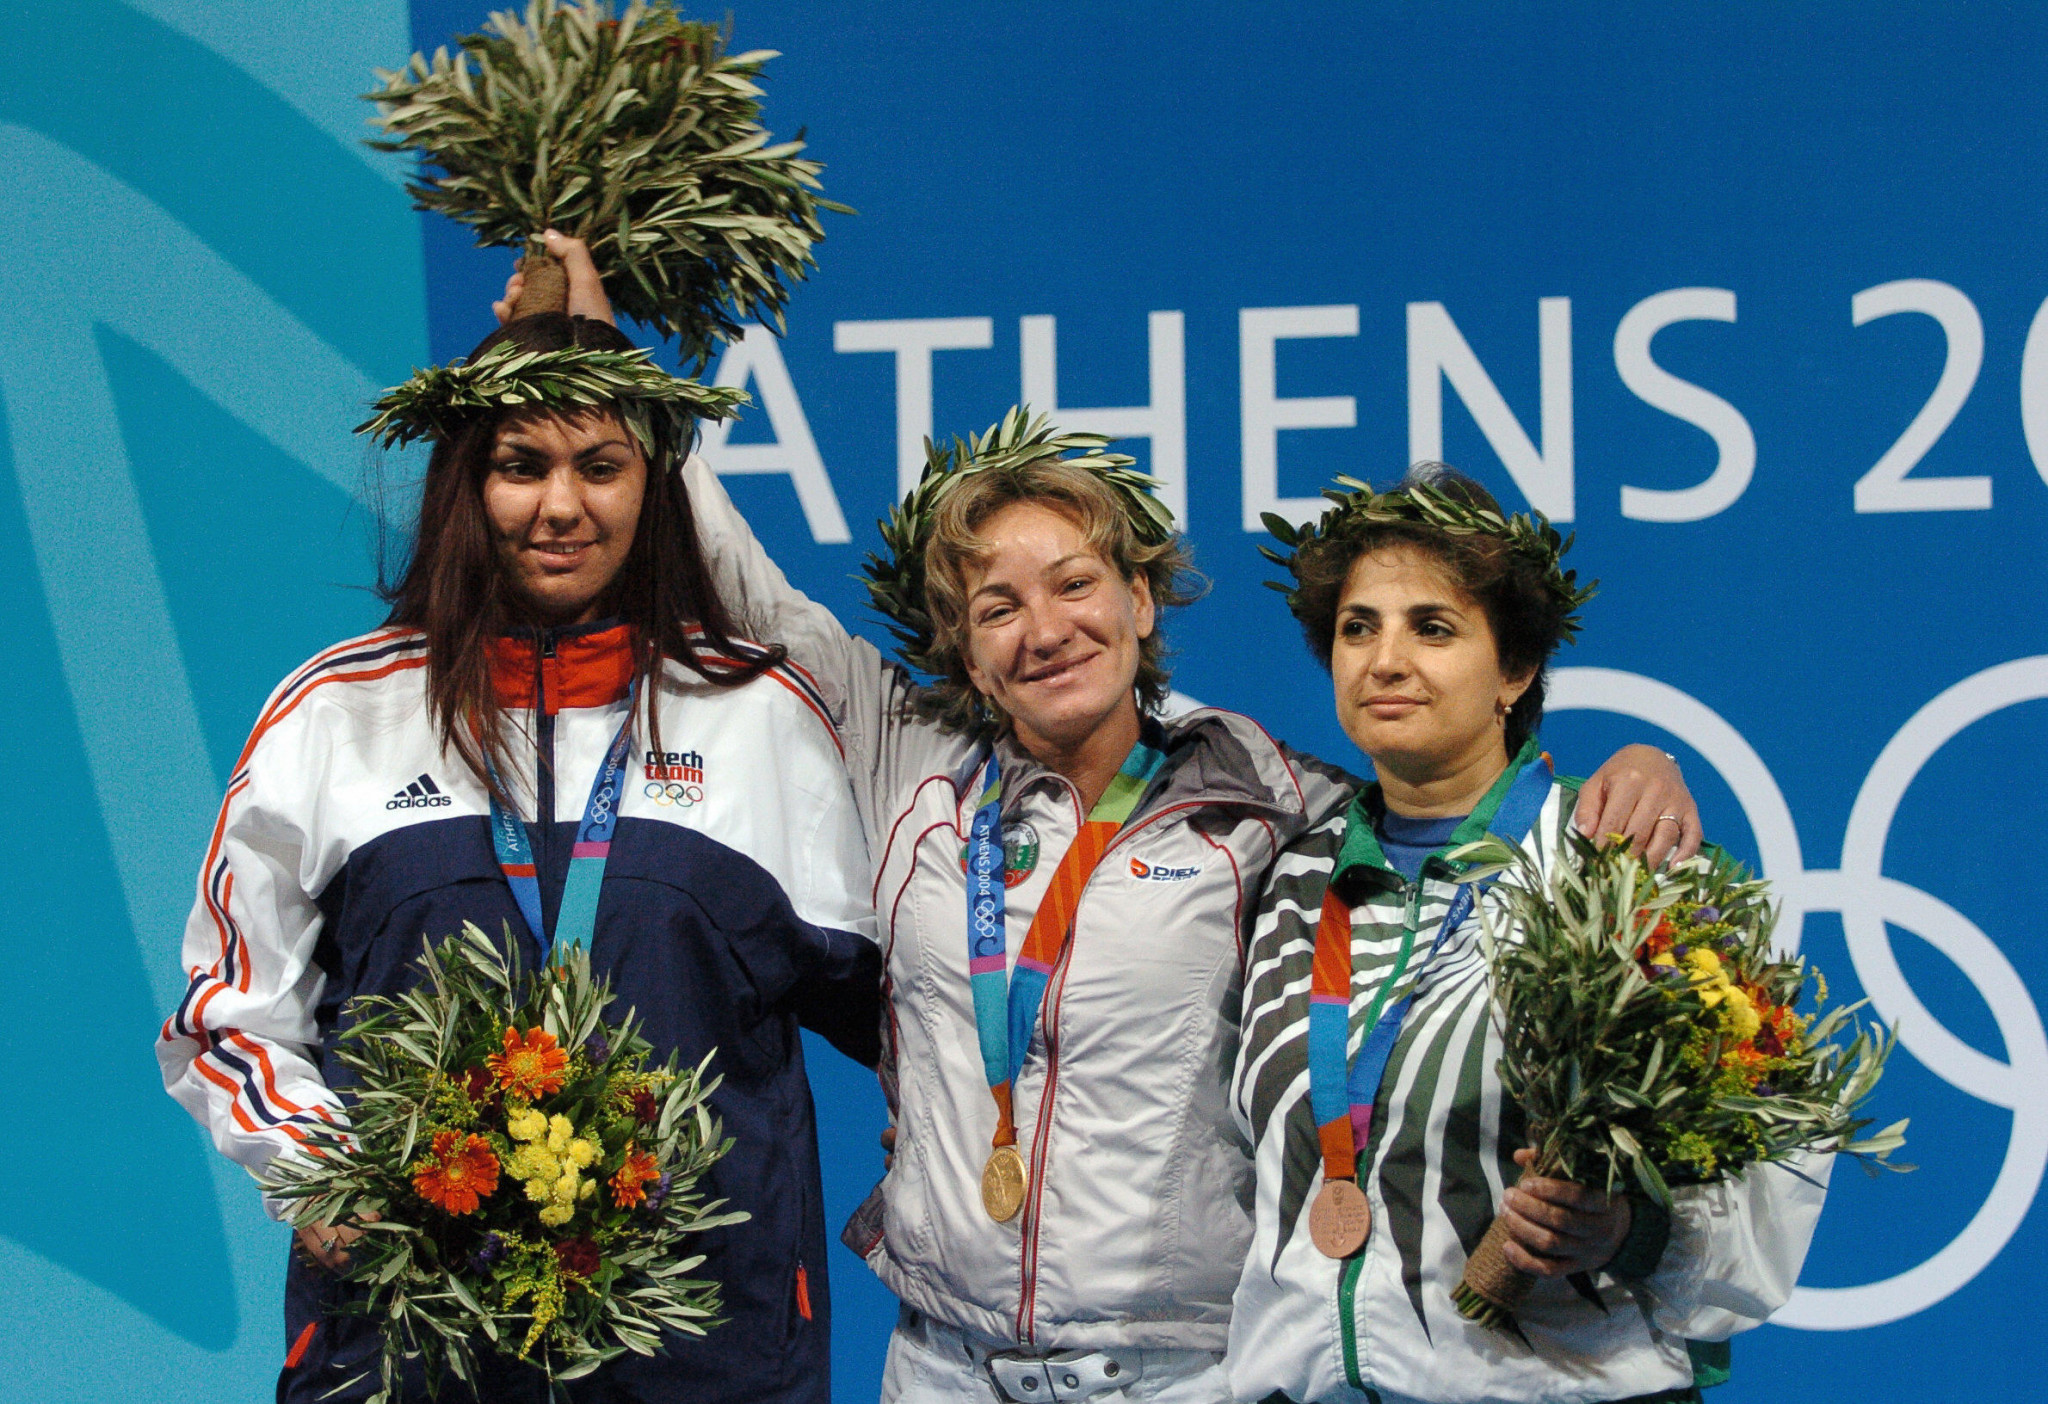 The bronze medal won at Athens 2004 by her aunt Irada Ashumova ,right, was also an inspiration for Nigar Nasirova ©Getty Images